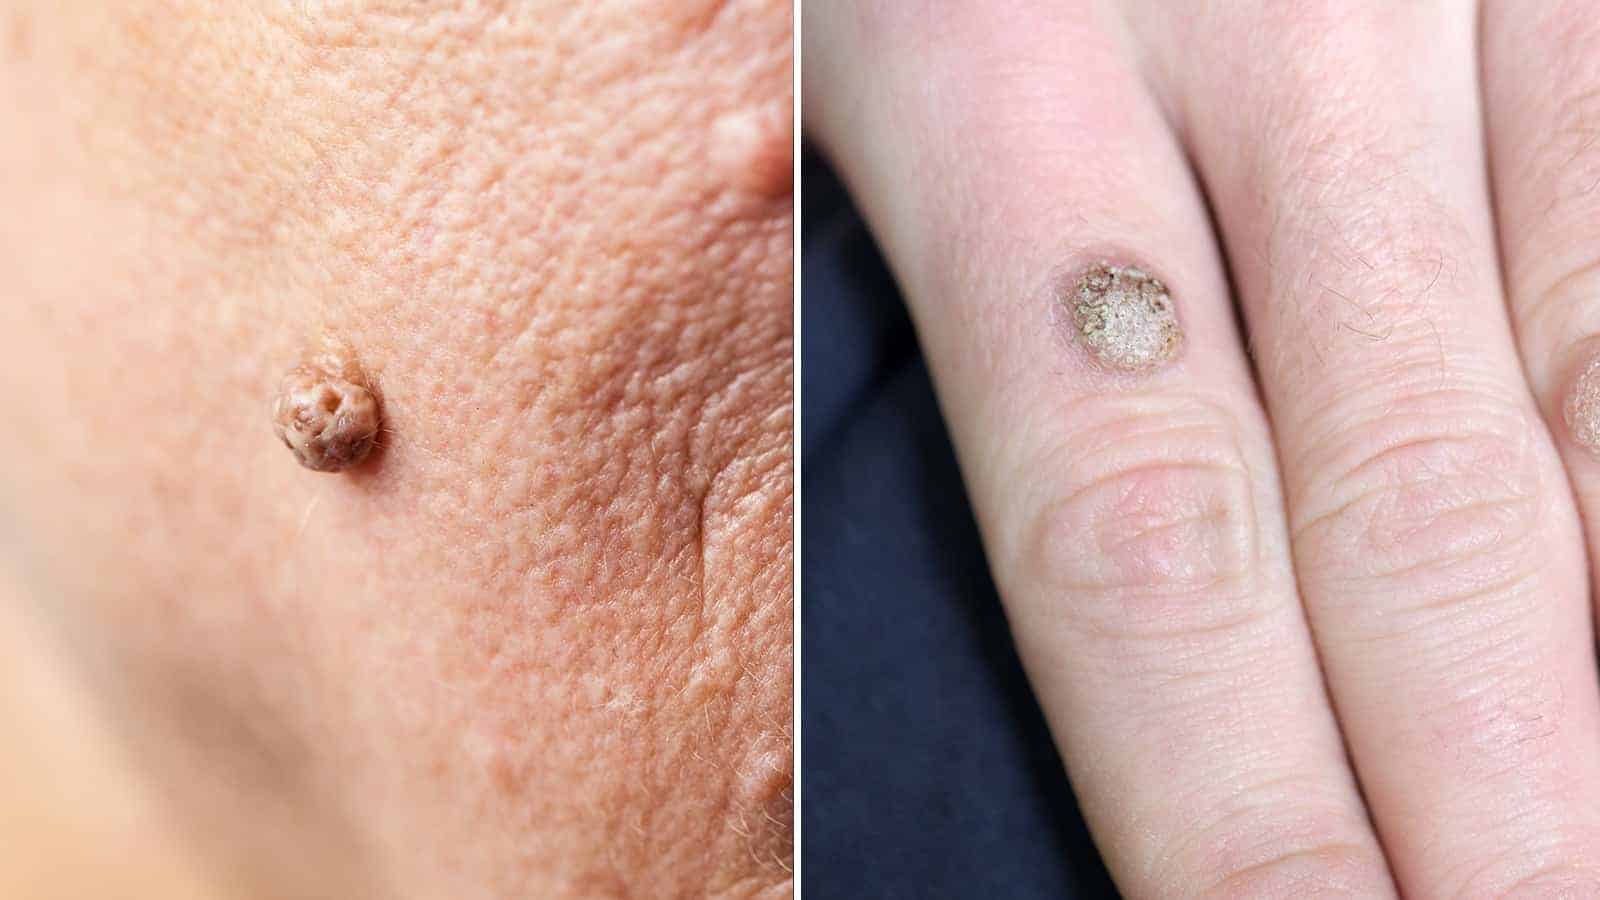 How to Remove Warts and Skin Tags Permanently